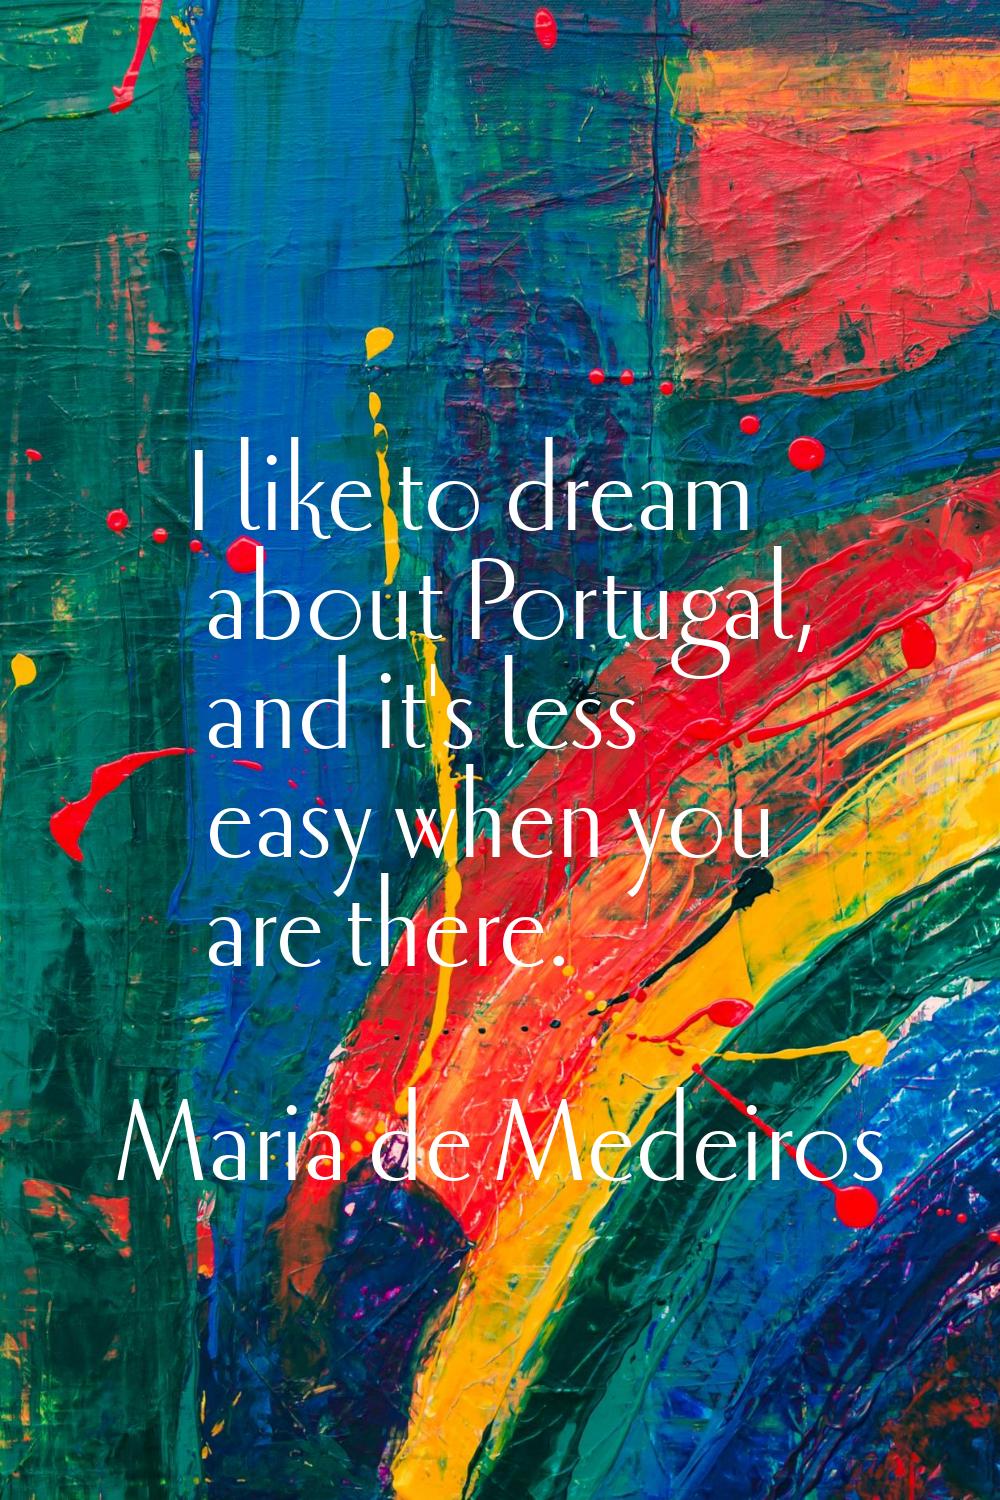 I like to dream about Portugal, and it's less easy when you are there.